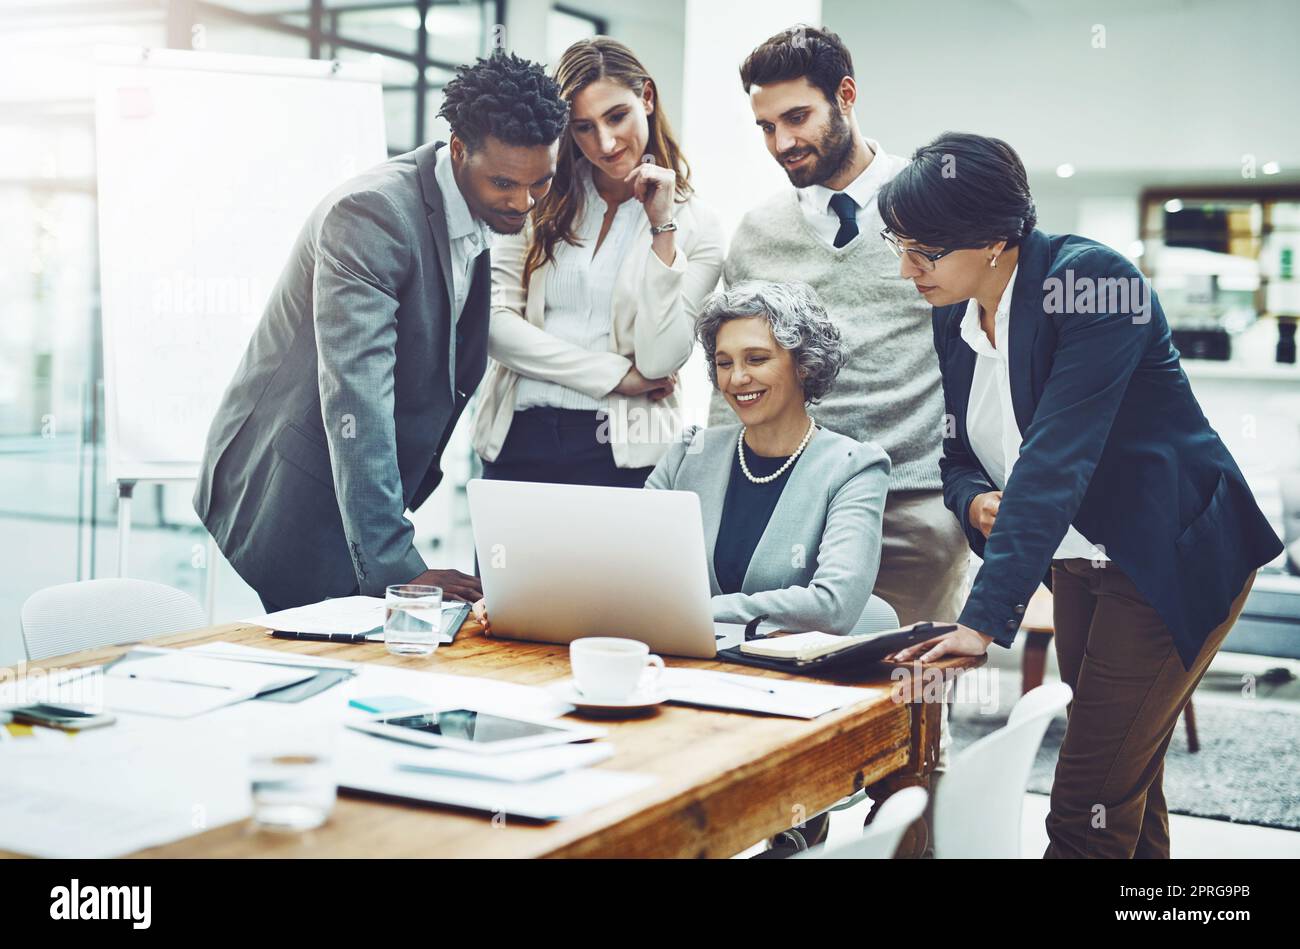 Creating ideas everyday. a corporate business team having a meeting in their office. Stock Photo